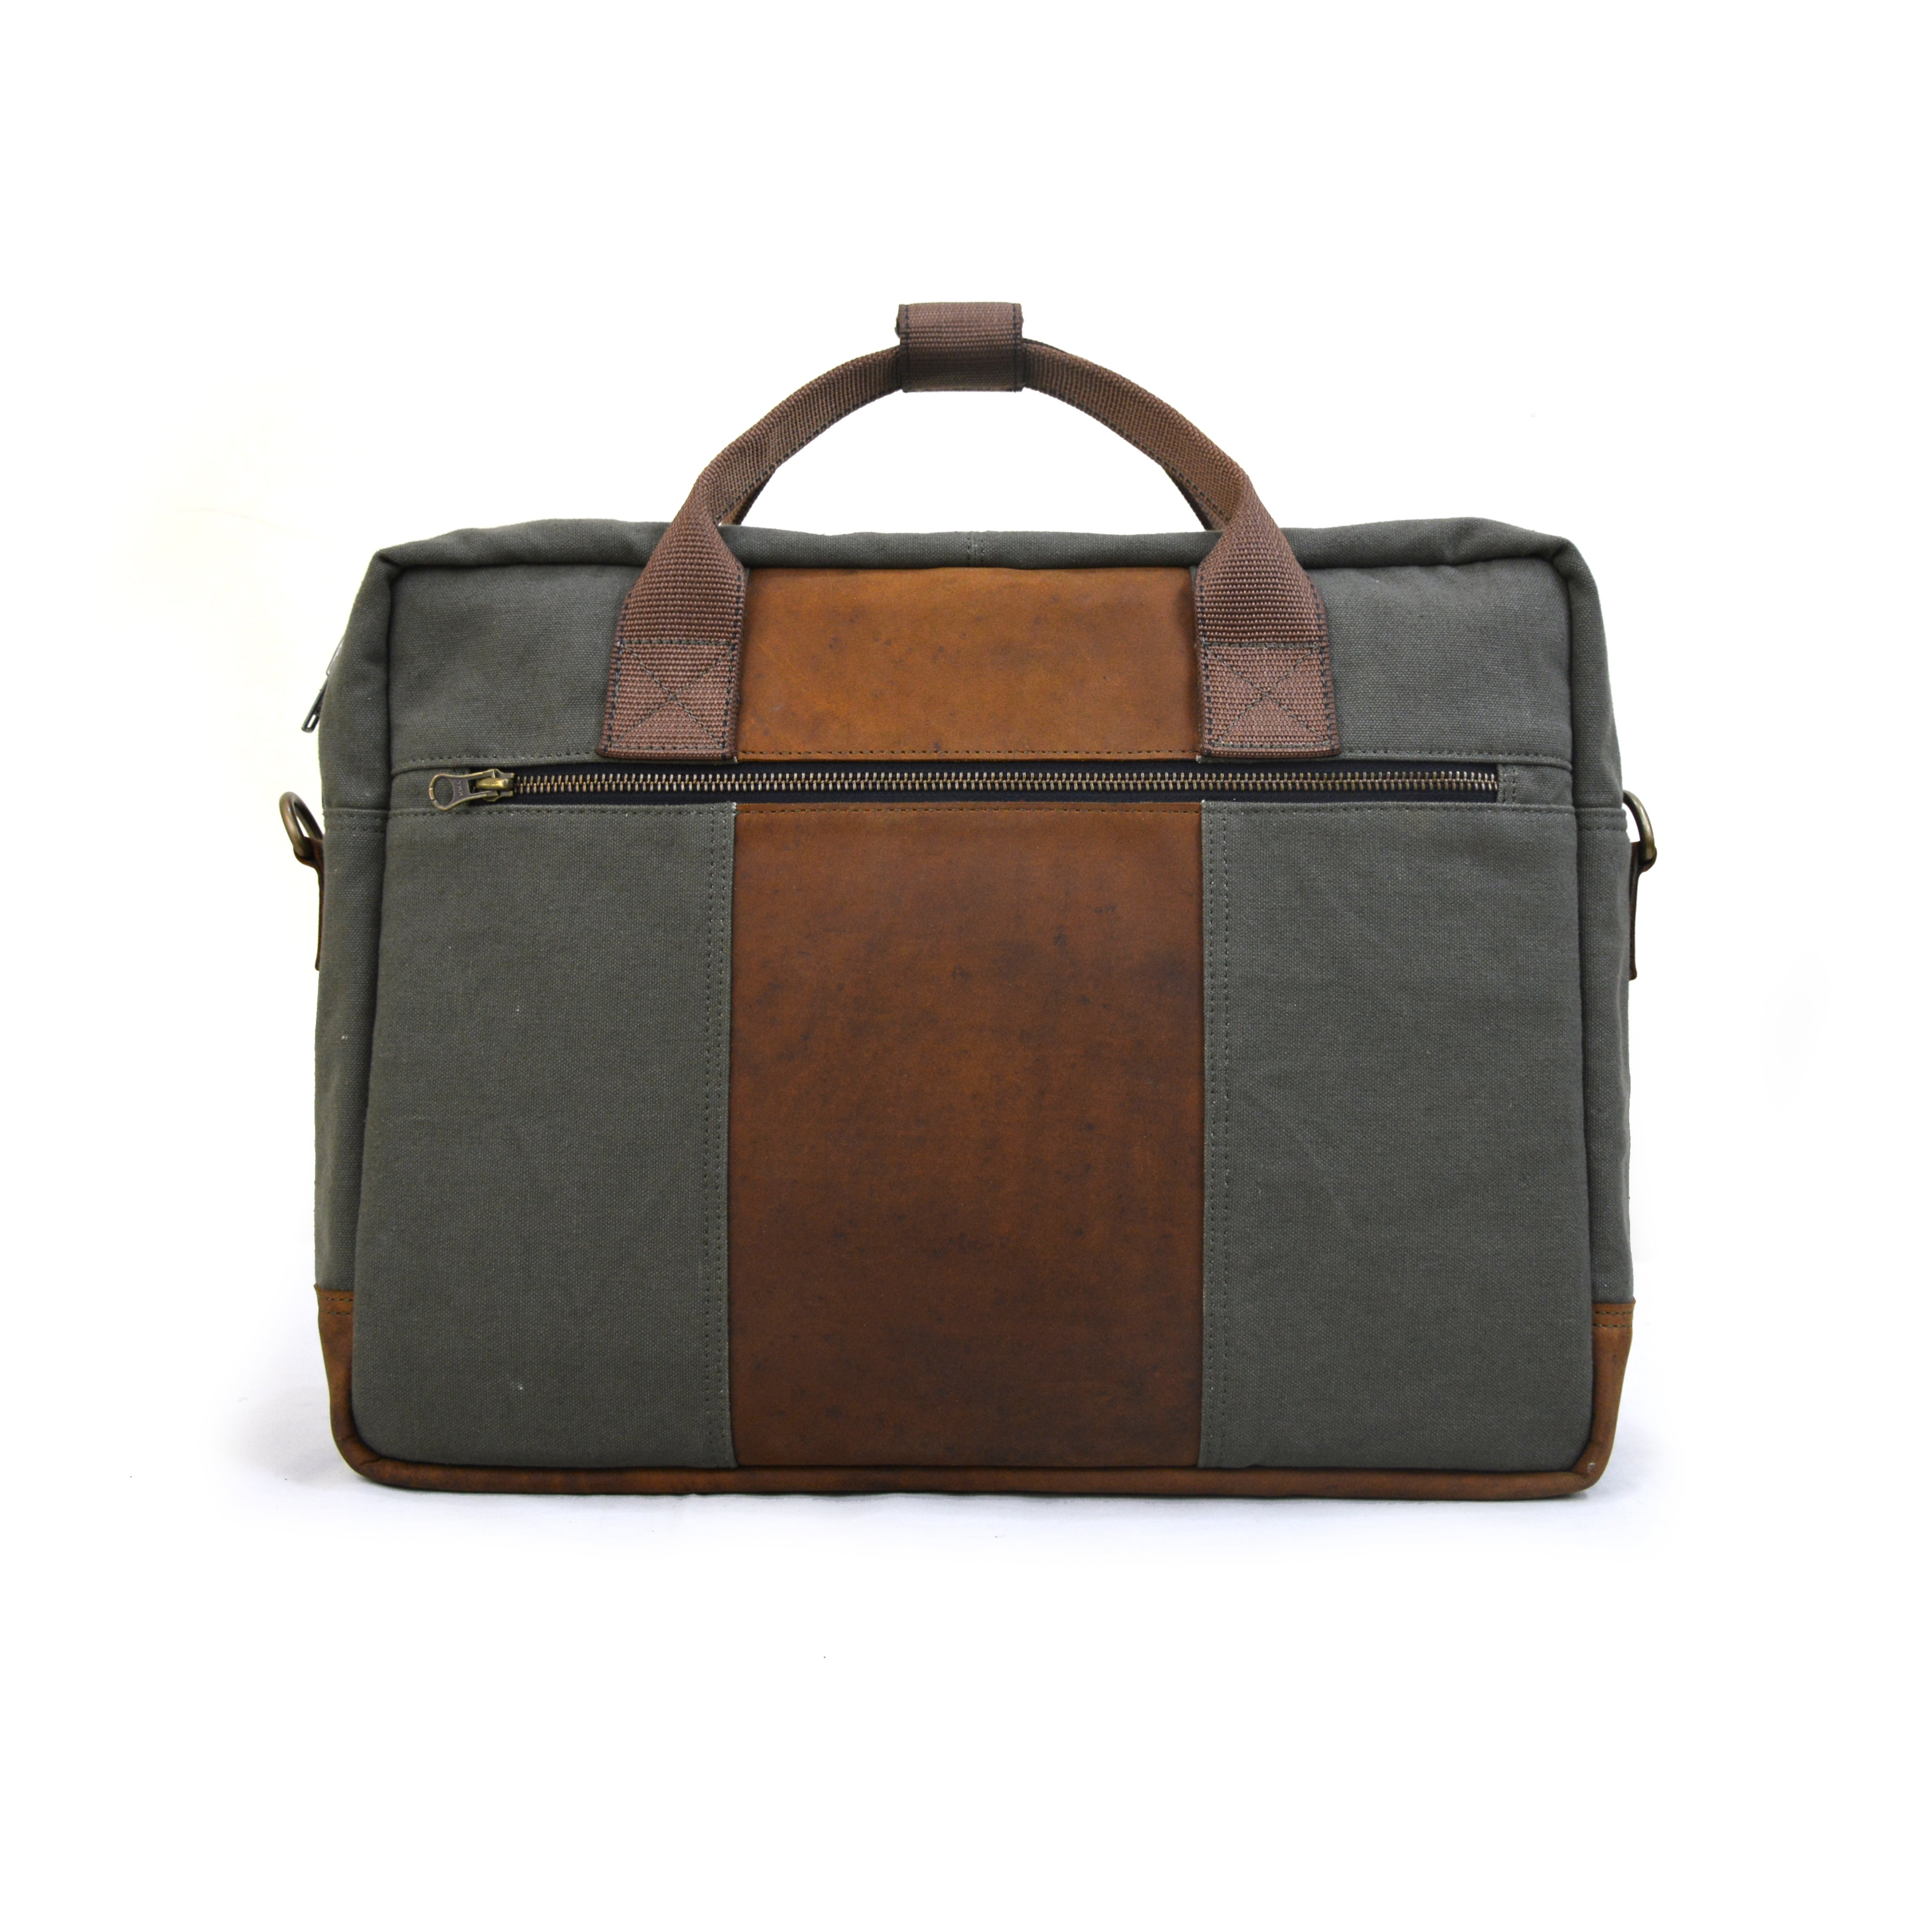 The 48h Travel Bag | Handcrafted in Spain | CAFÉ Leather